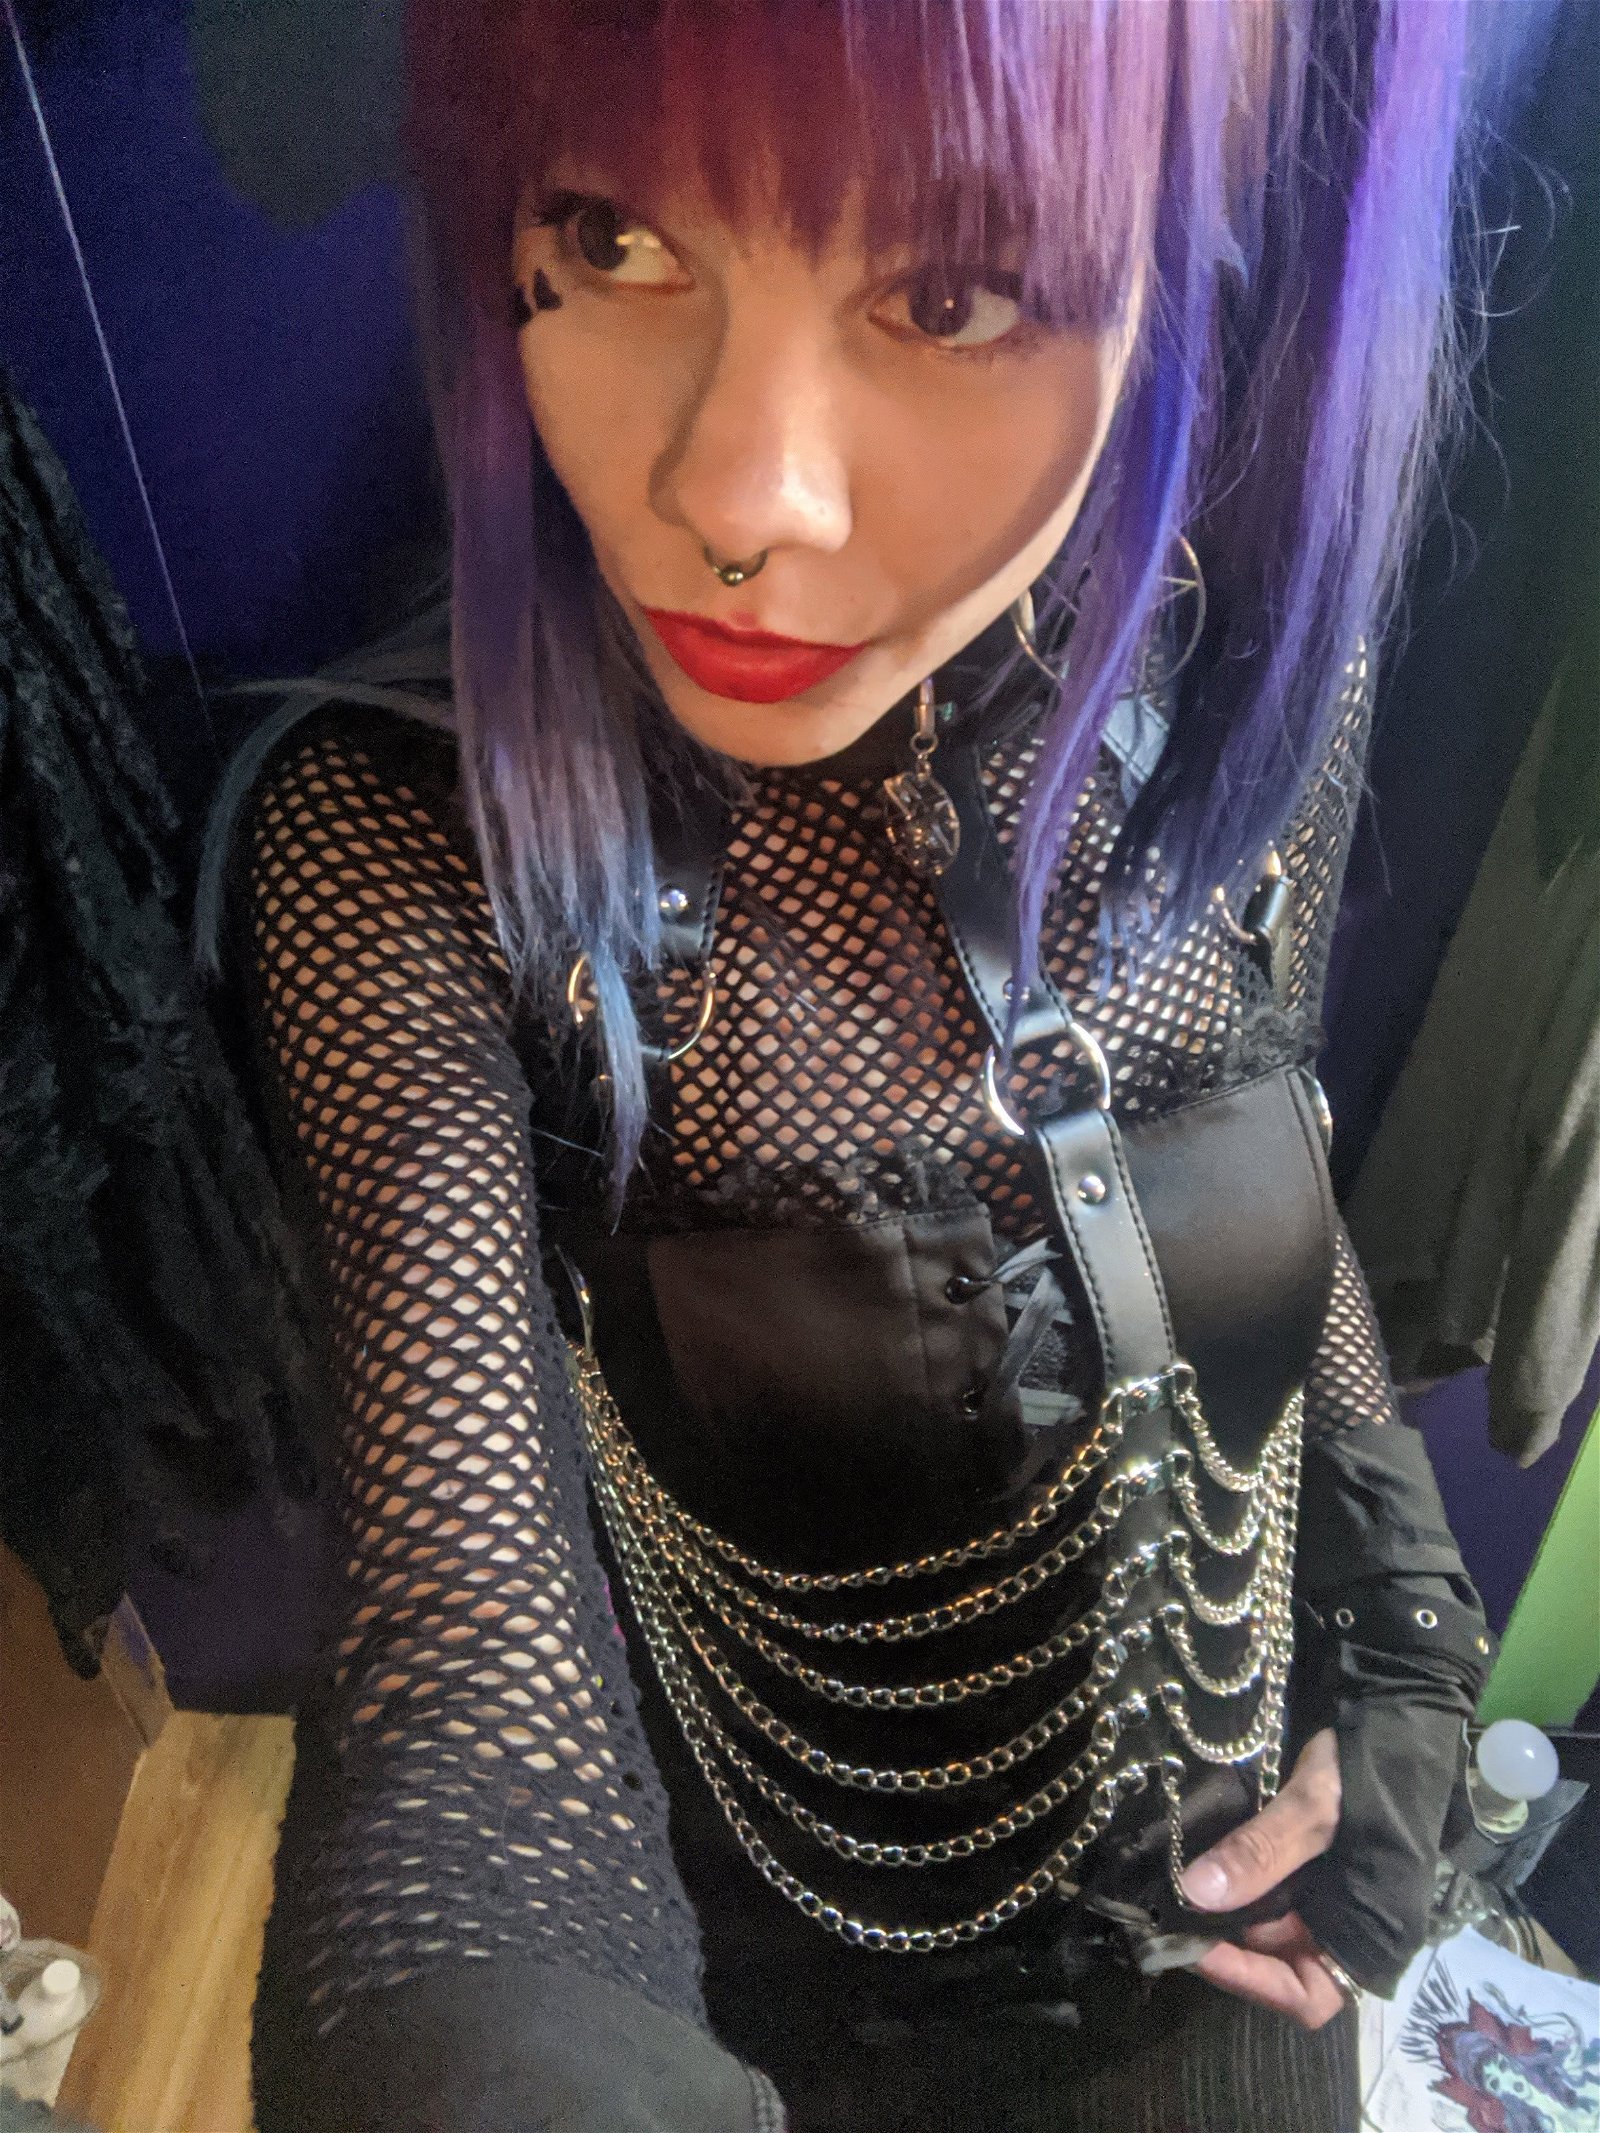 Photo by Fcuk Fiona with the username @fionacrimson, who is a star user,  September 11, 2022 at 9:04 AM and the text says '#cumhere and #sharesome love for me :3 #shorthair #gothchick #alt #hellosharesome'